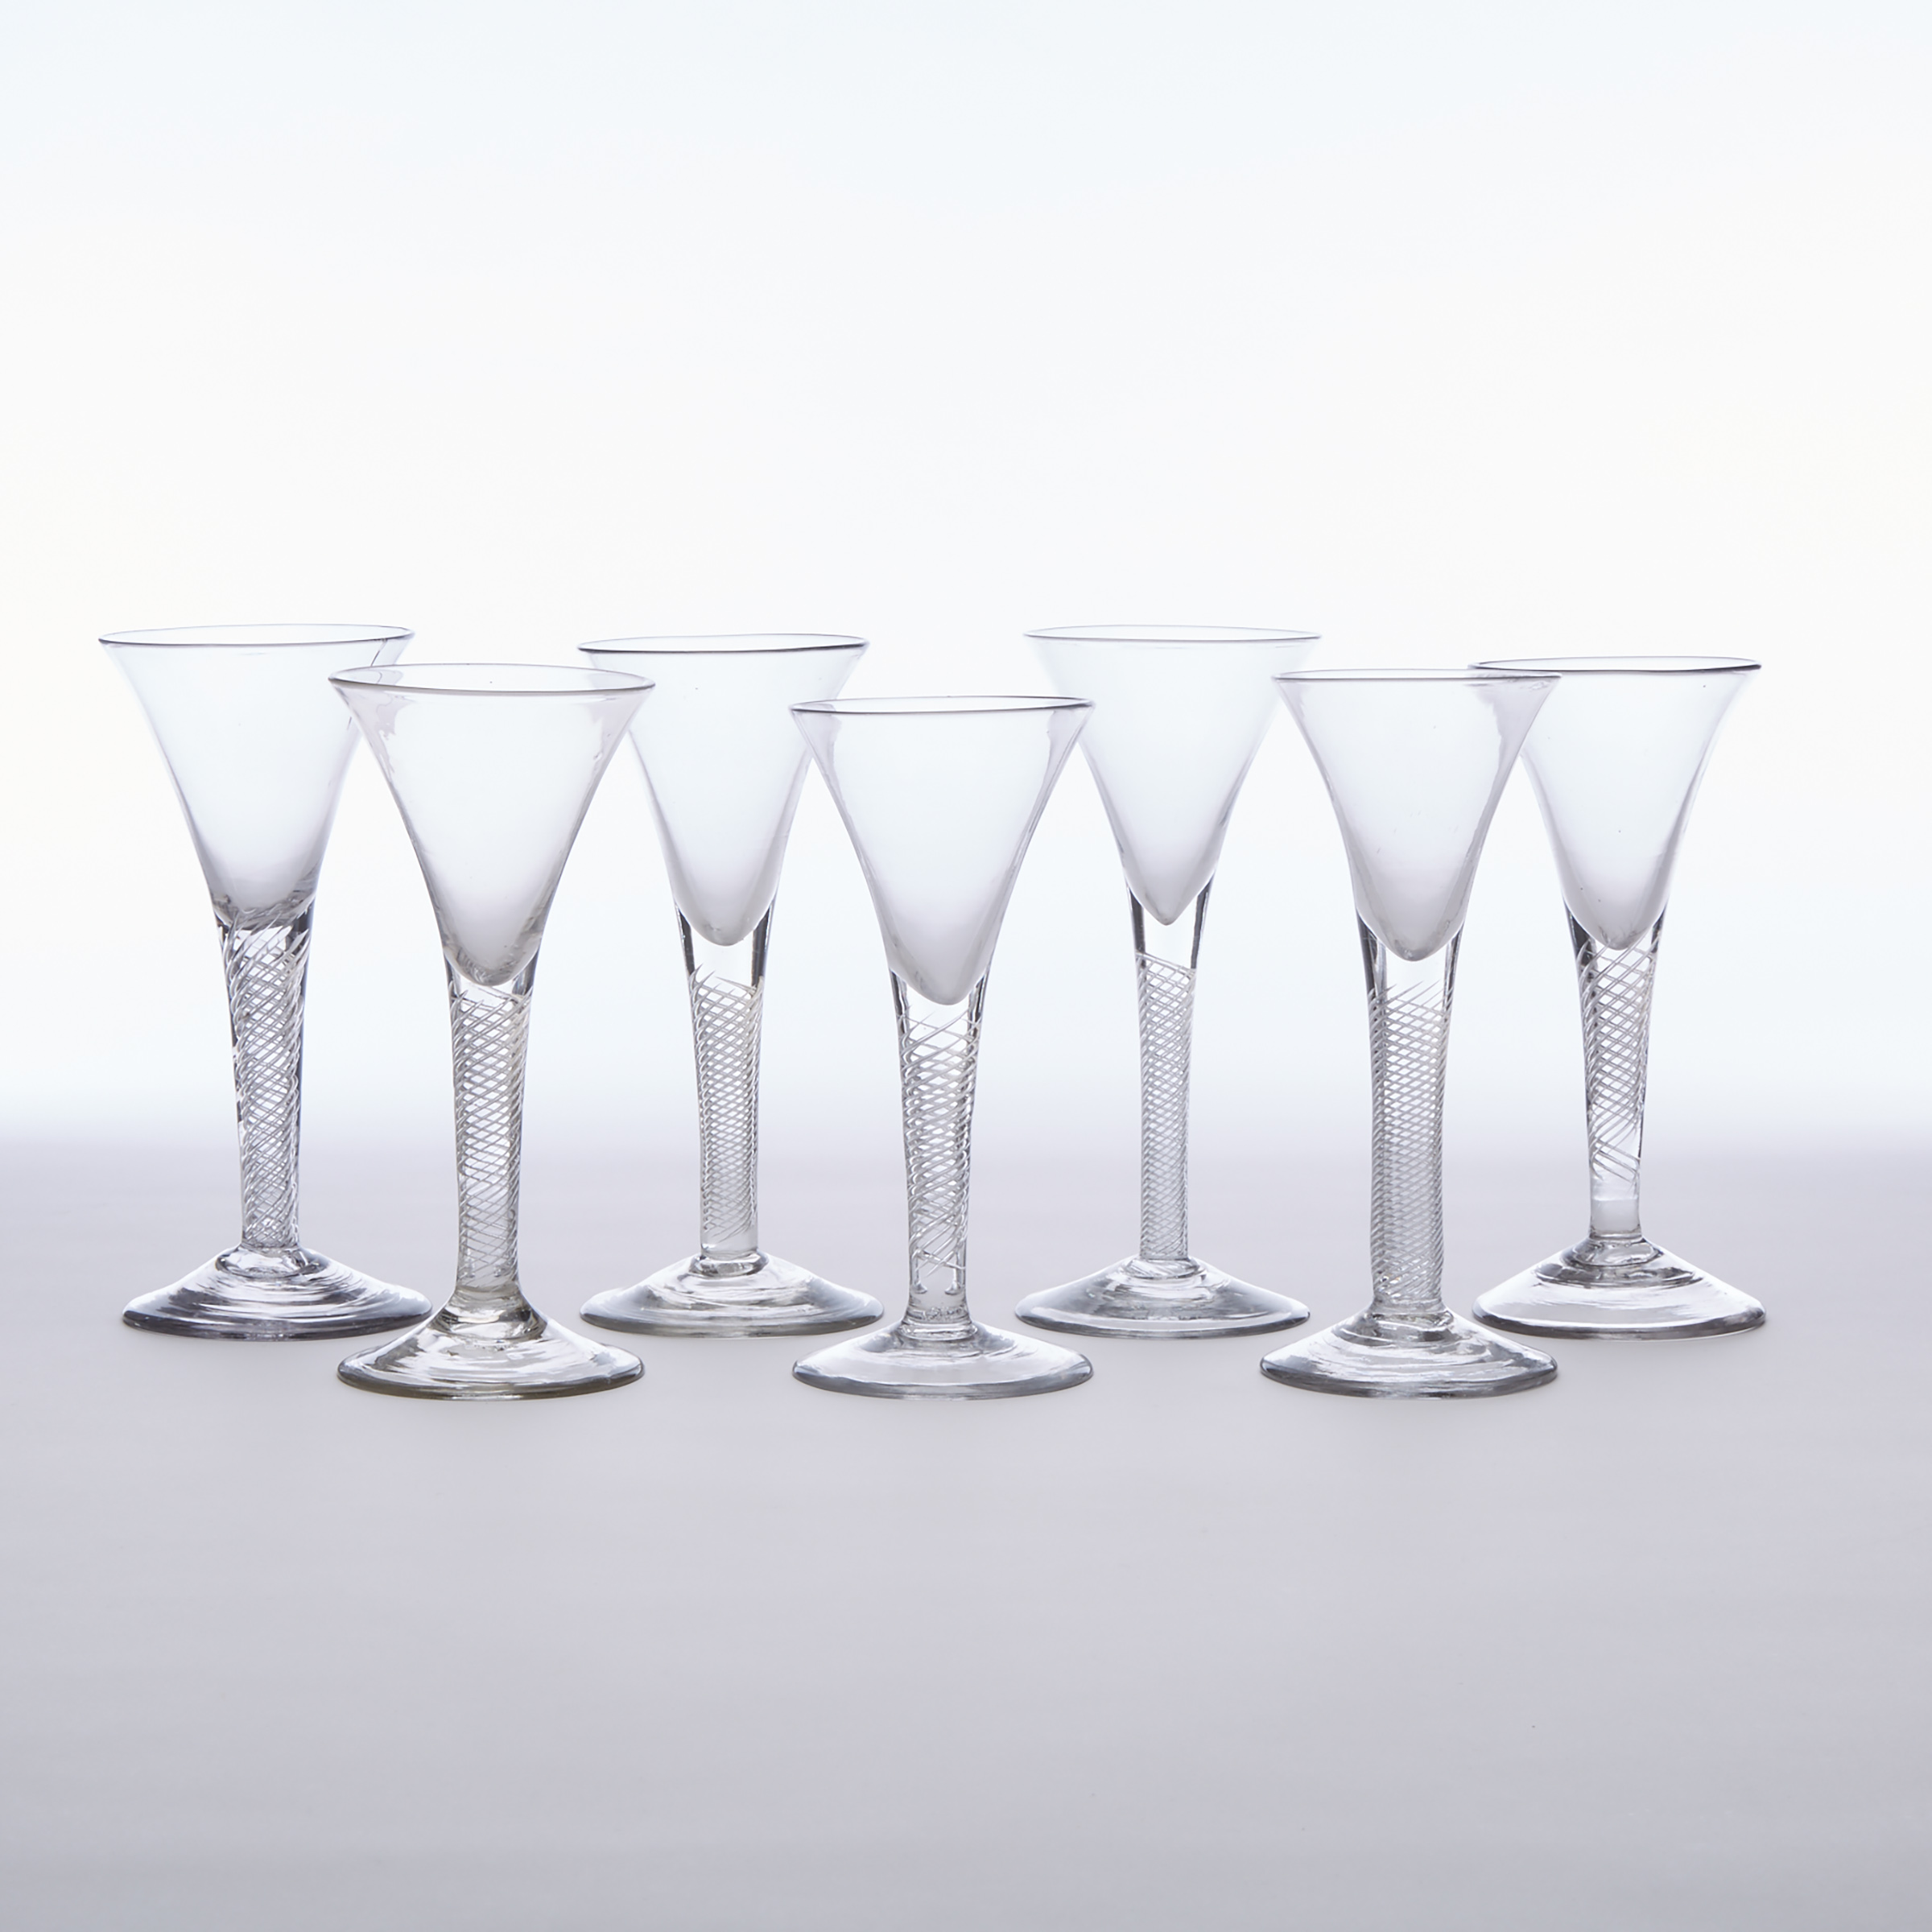 Seven English Air Twist Stemmed Large Wine Glasses, mid-18th century